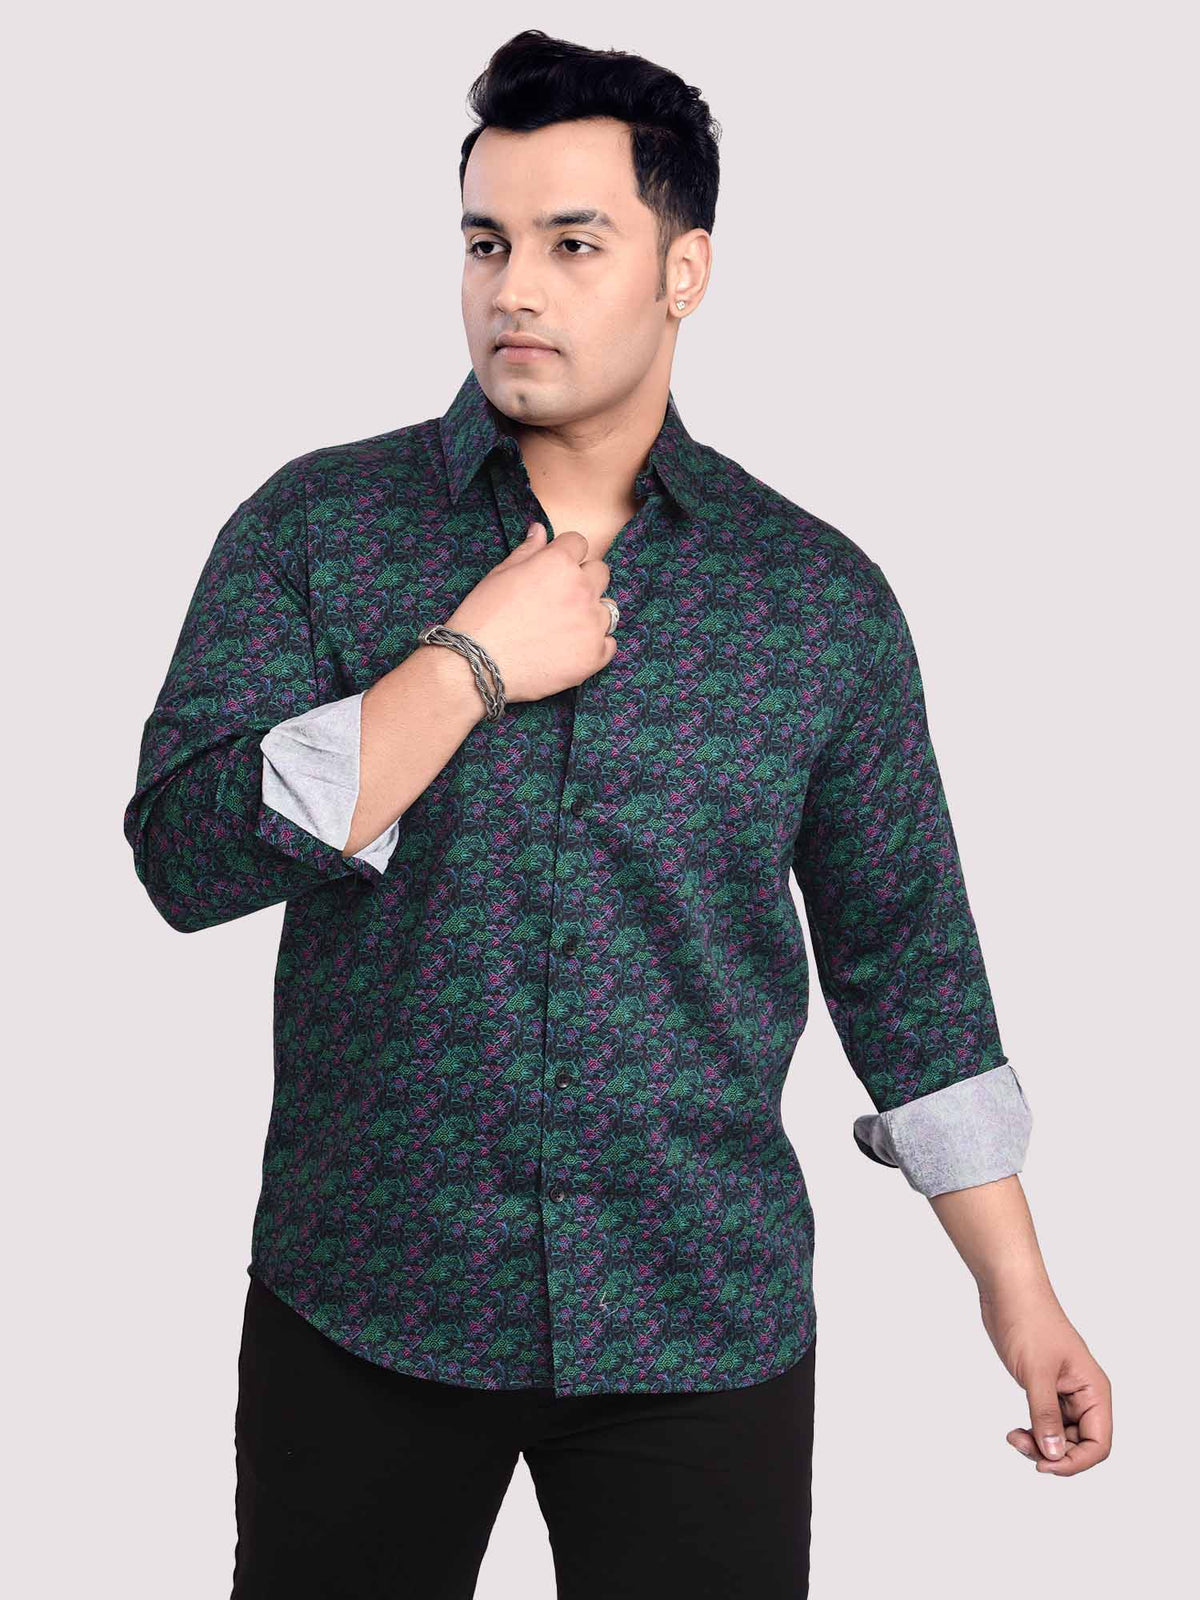 Green & Pink Printed Cotton Full sleeve Men's Plus size